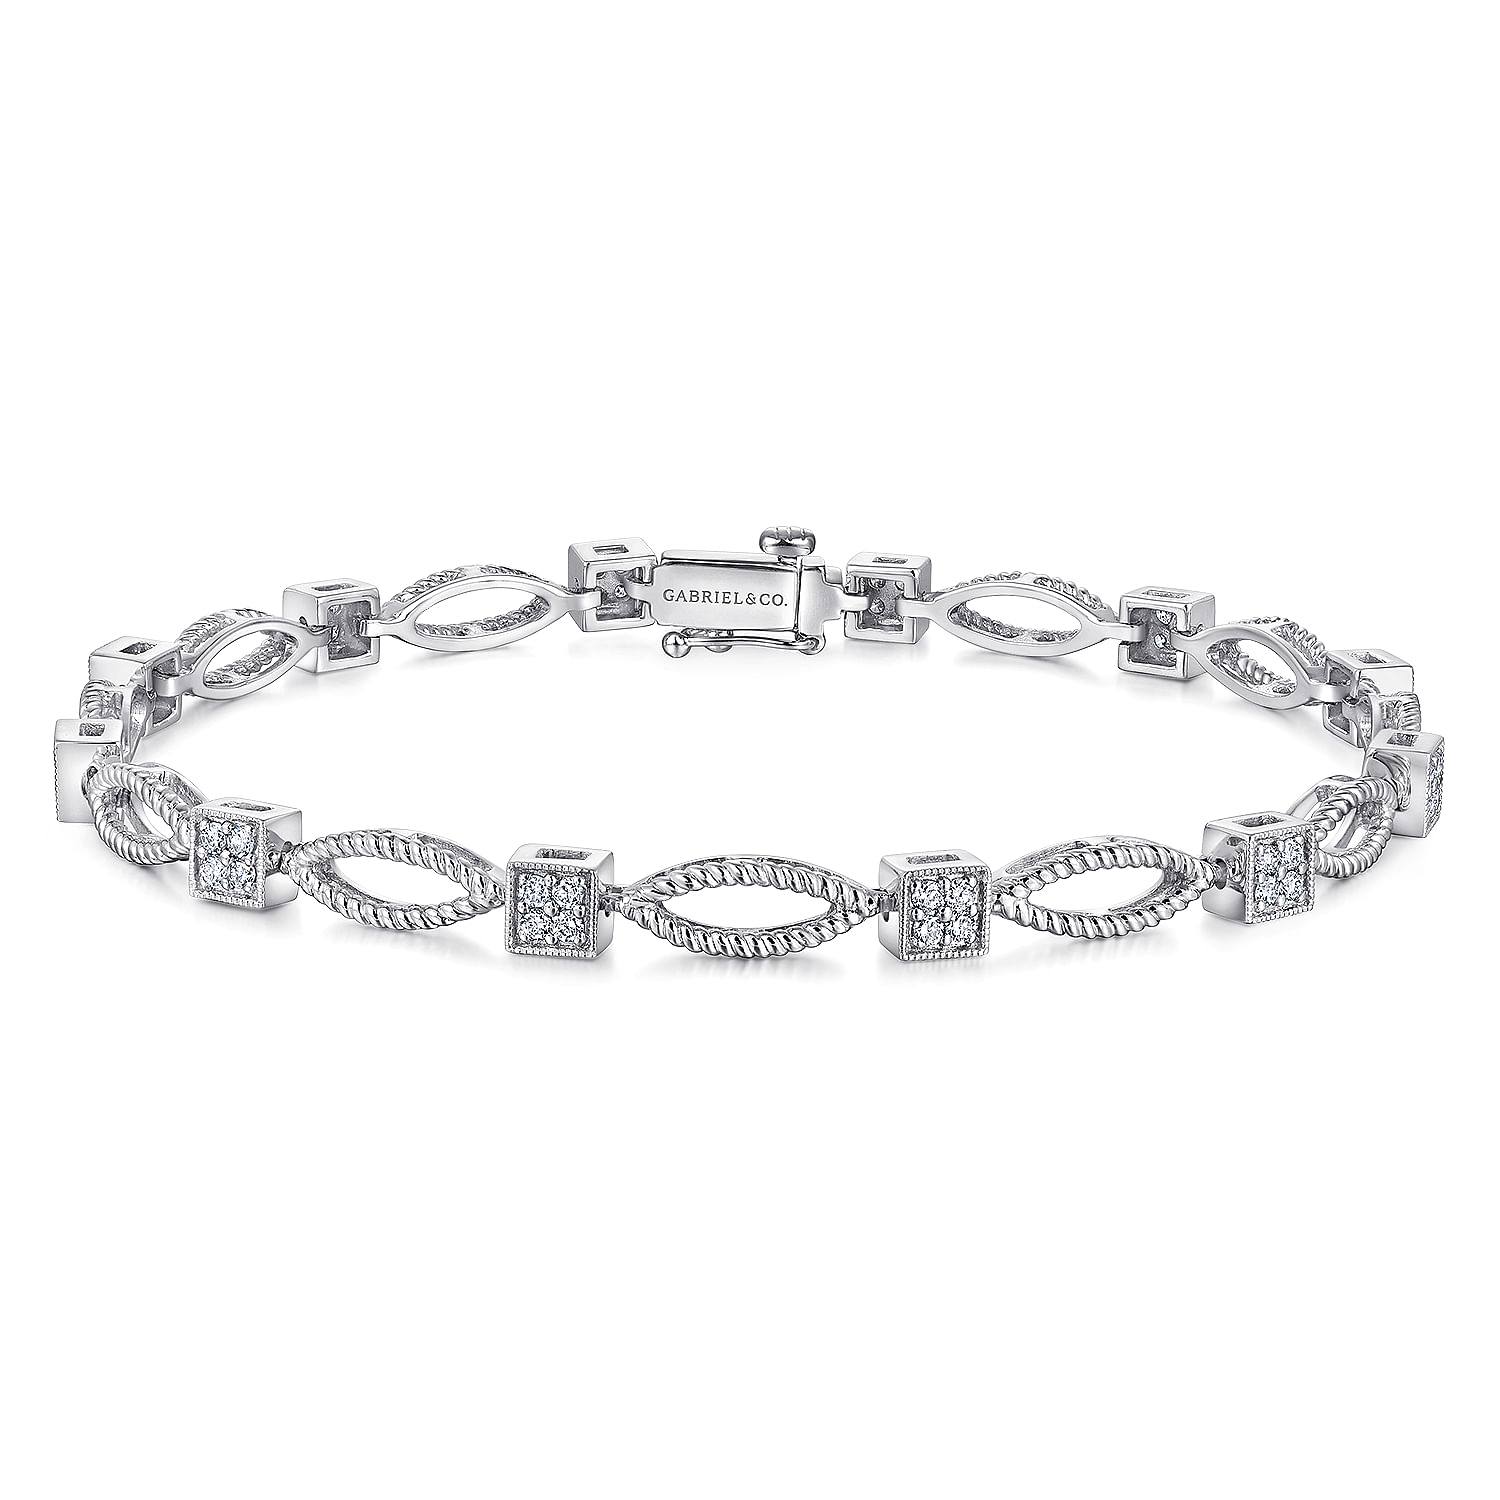 14K-White-Gold-Twisted-Rope-Link-Tennis-Bracelet-with-Pave-Diamond-Cube-Spacers1